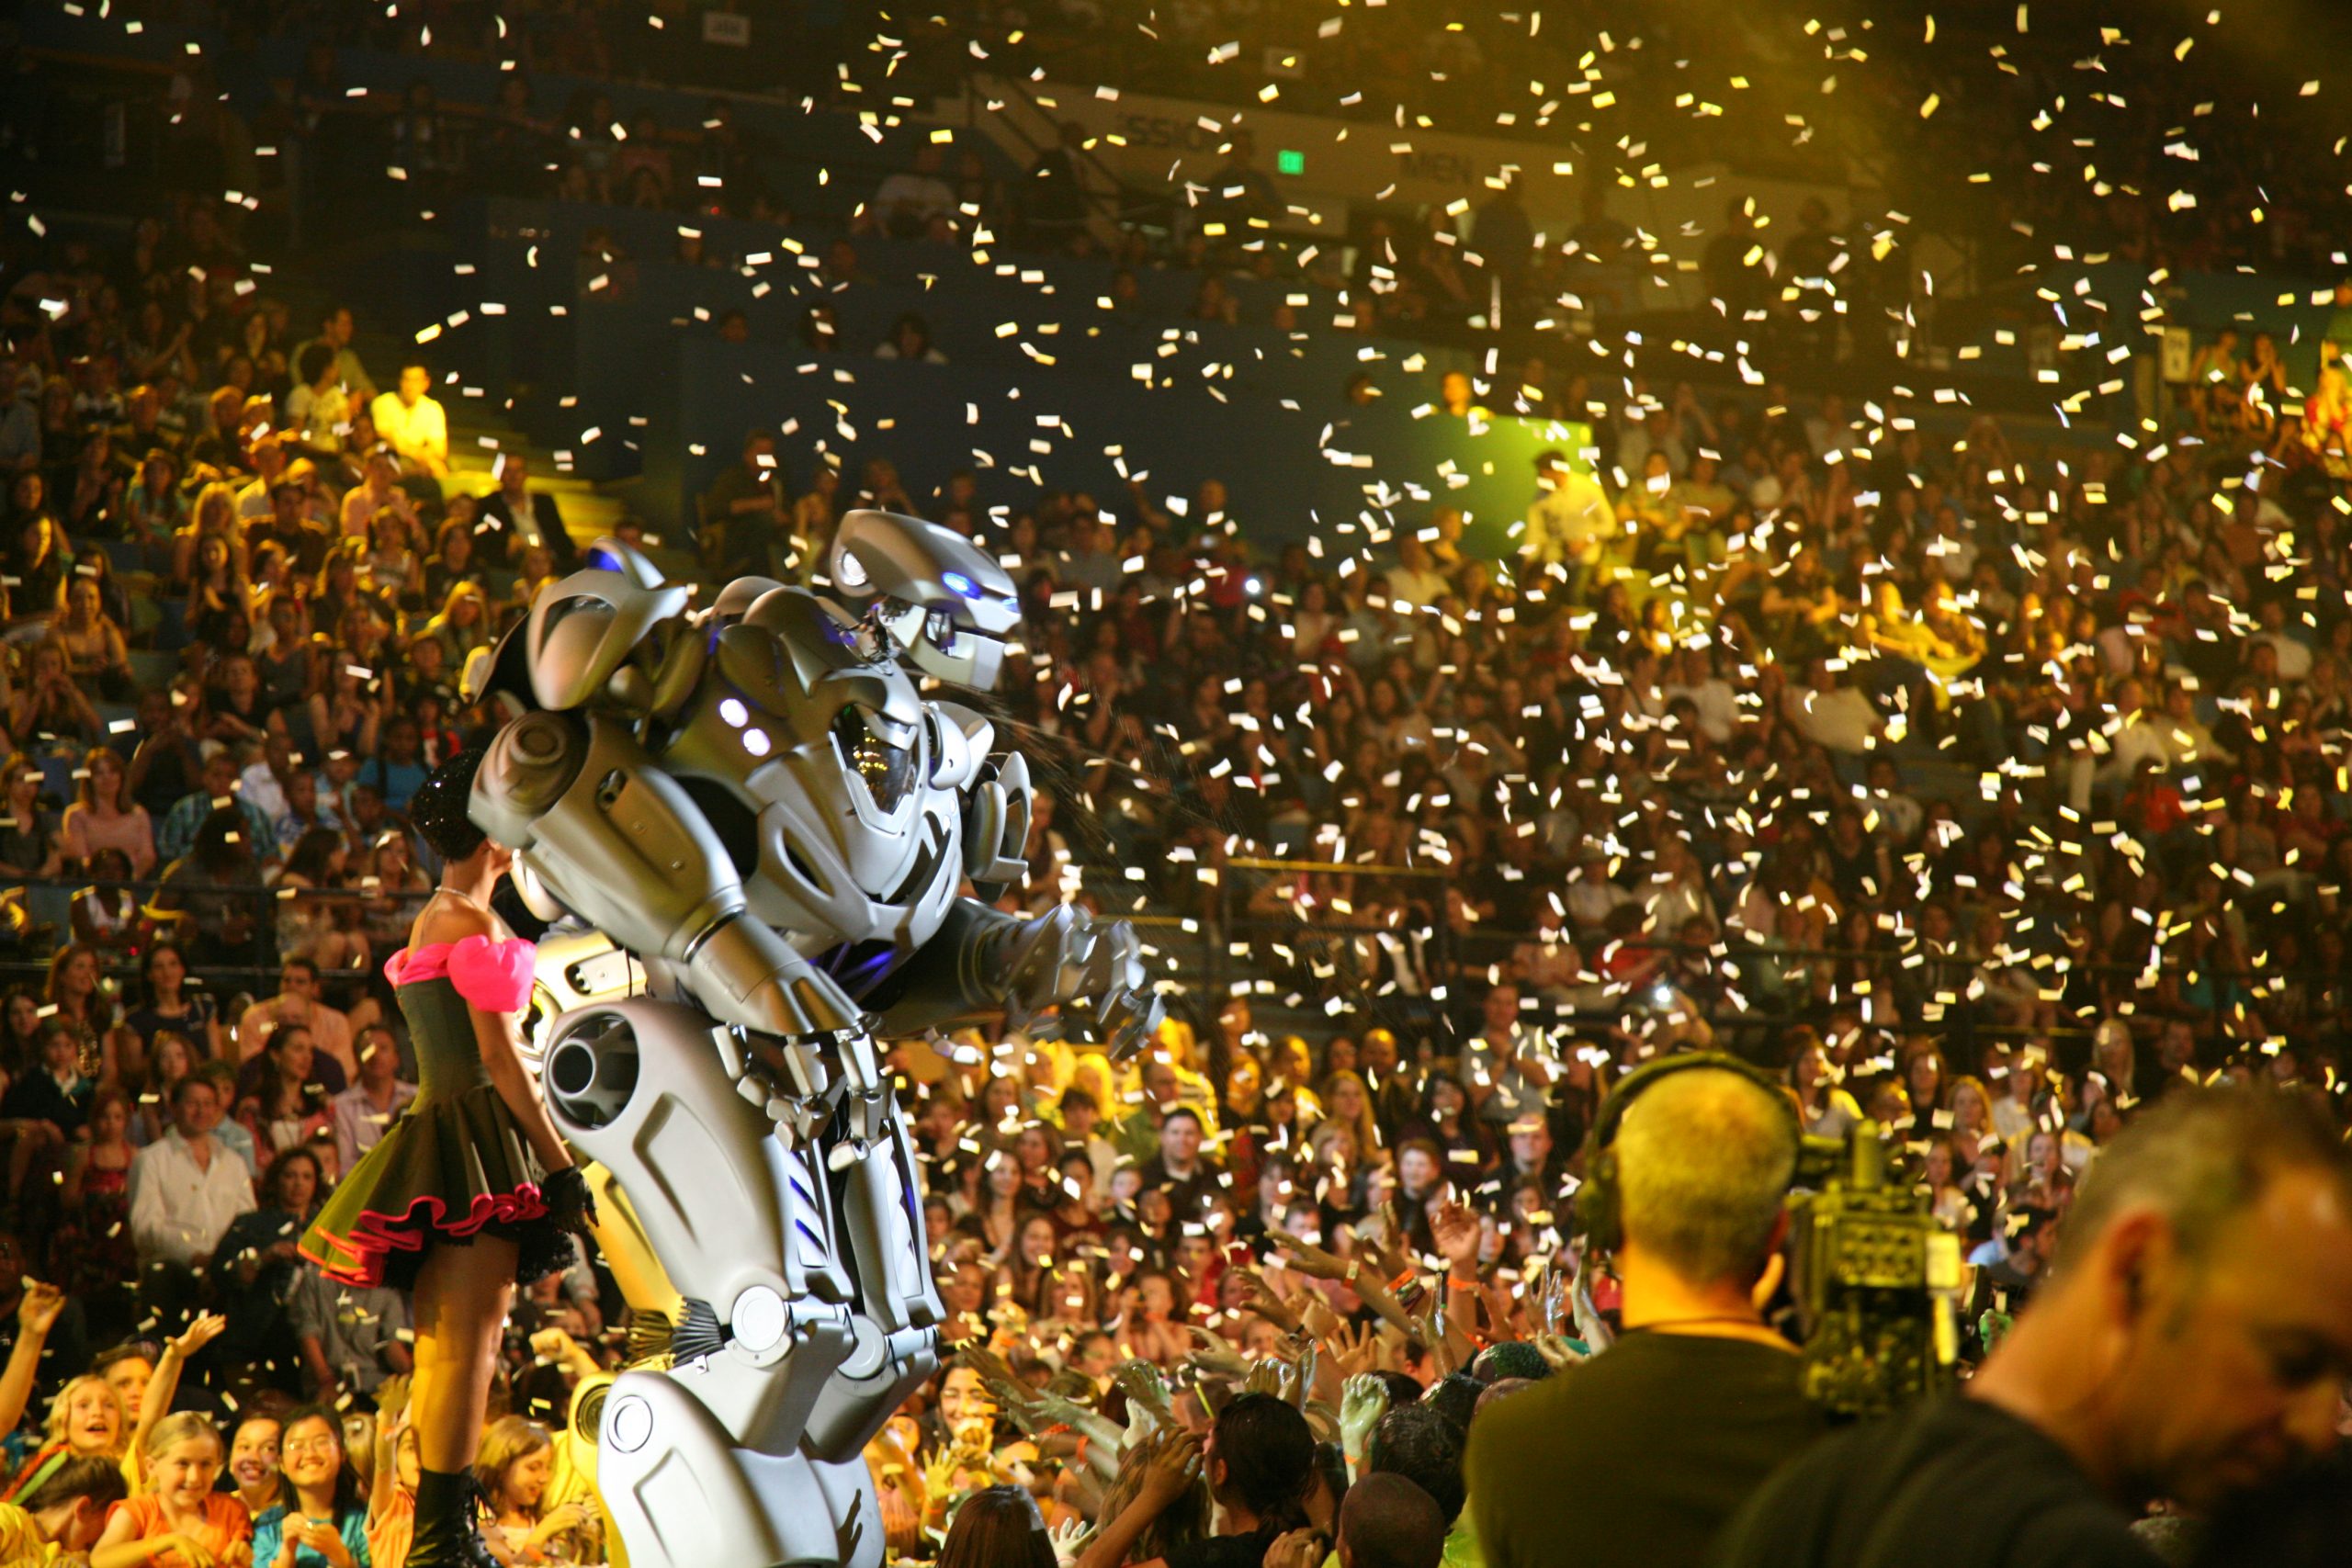 Titan the Robot on stage with Rihanna in Hollywood LA